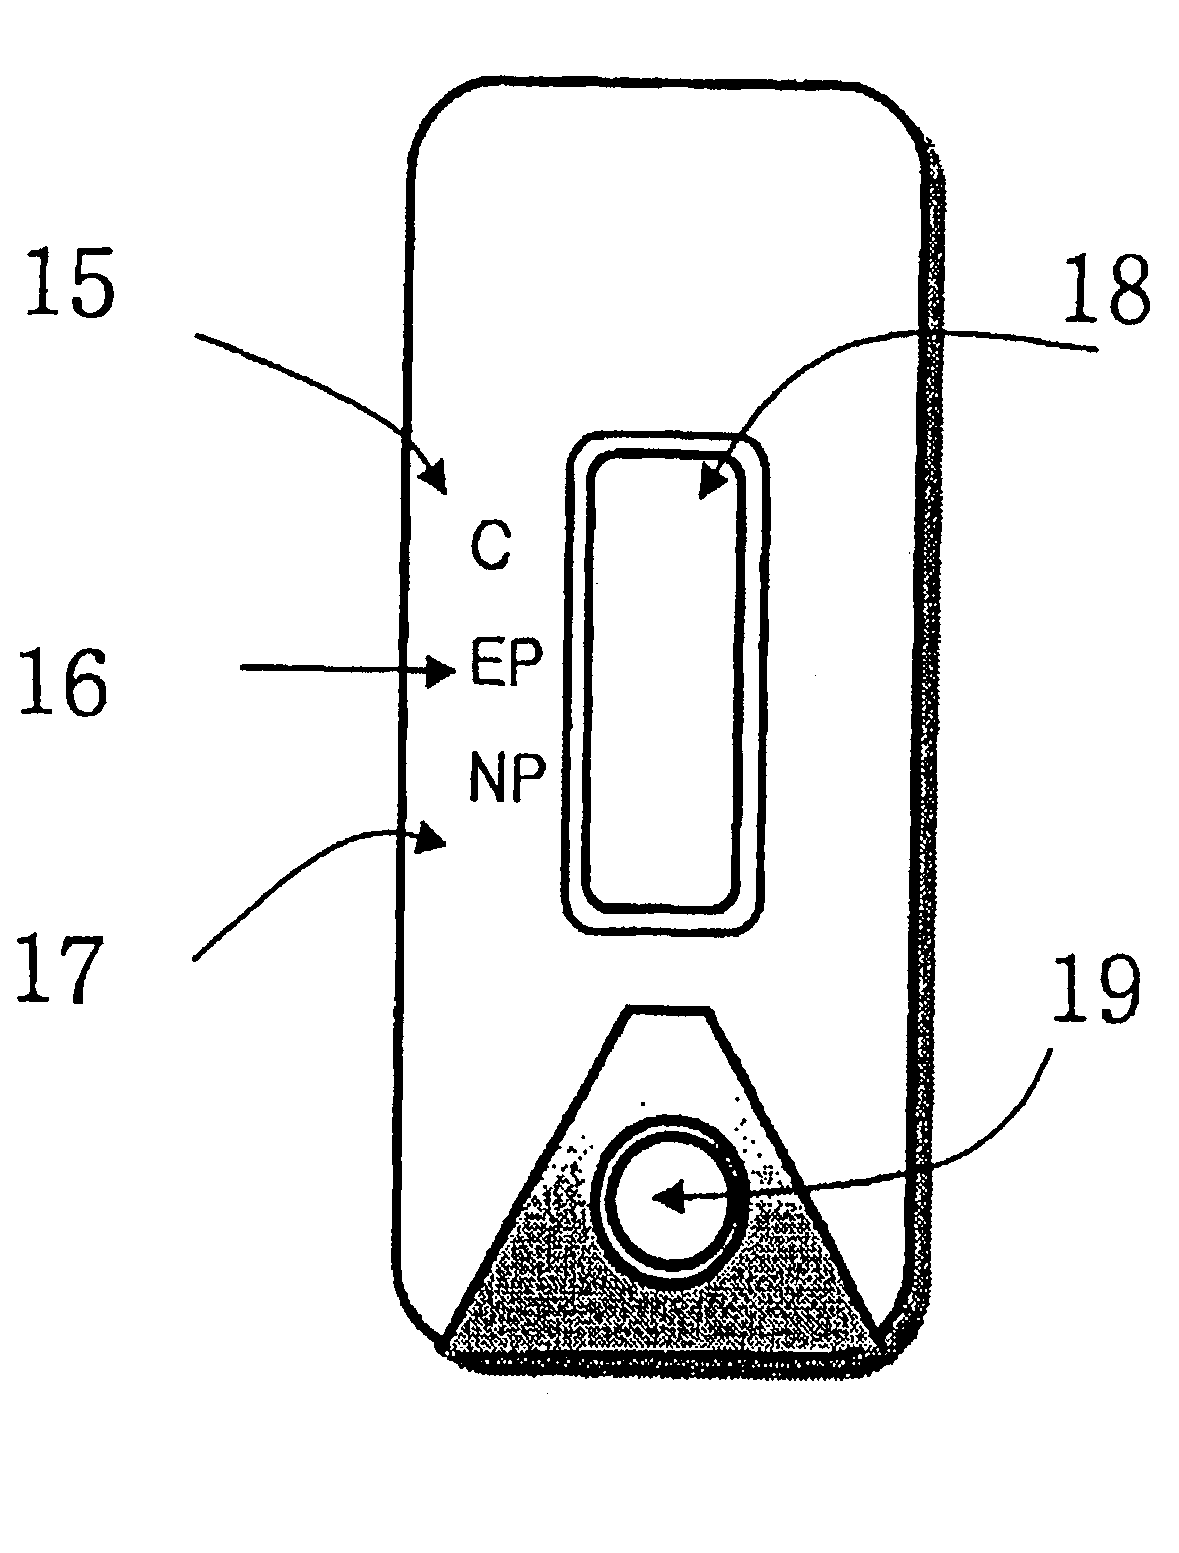 Diagnostic device for distinguishing between normal and ectopic pregnancy and method for preparing the same